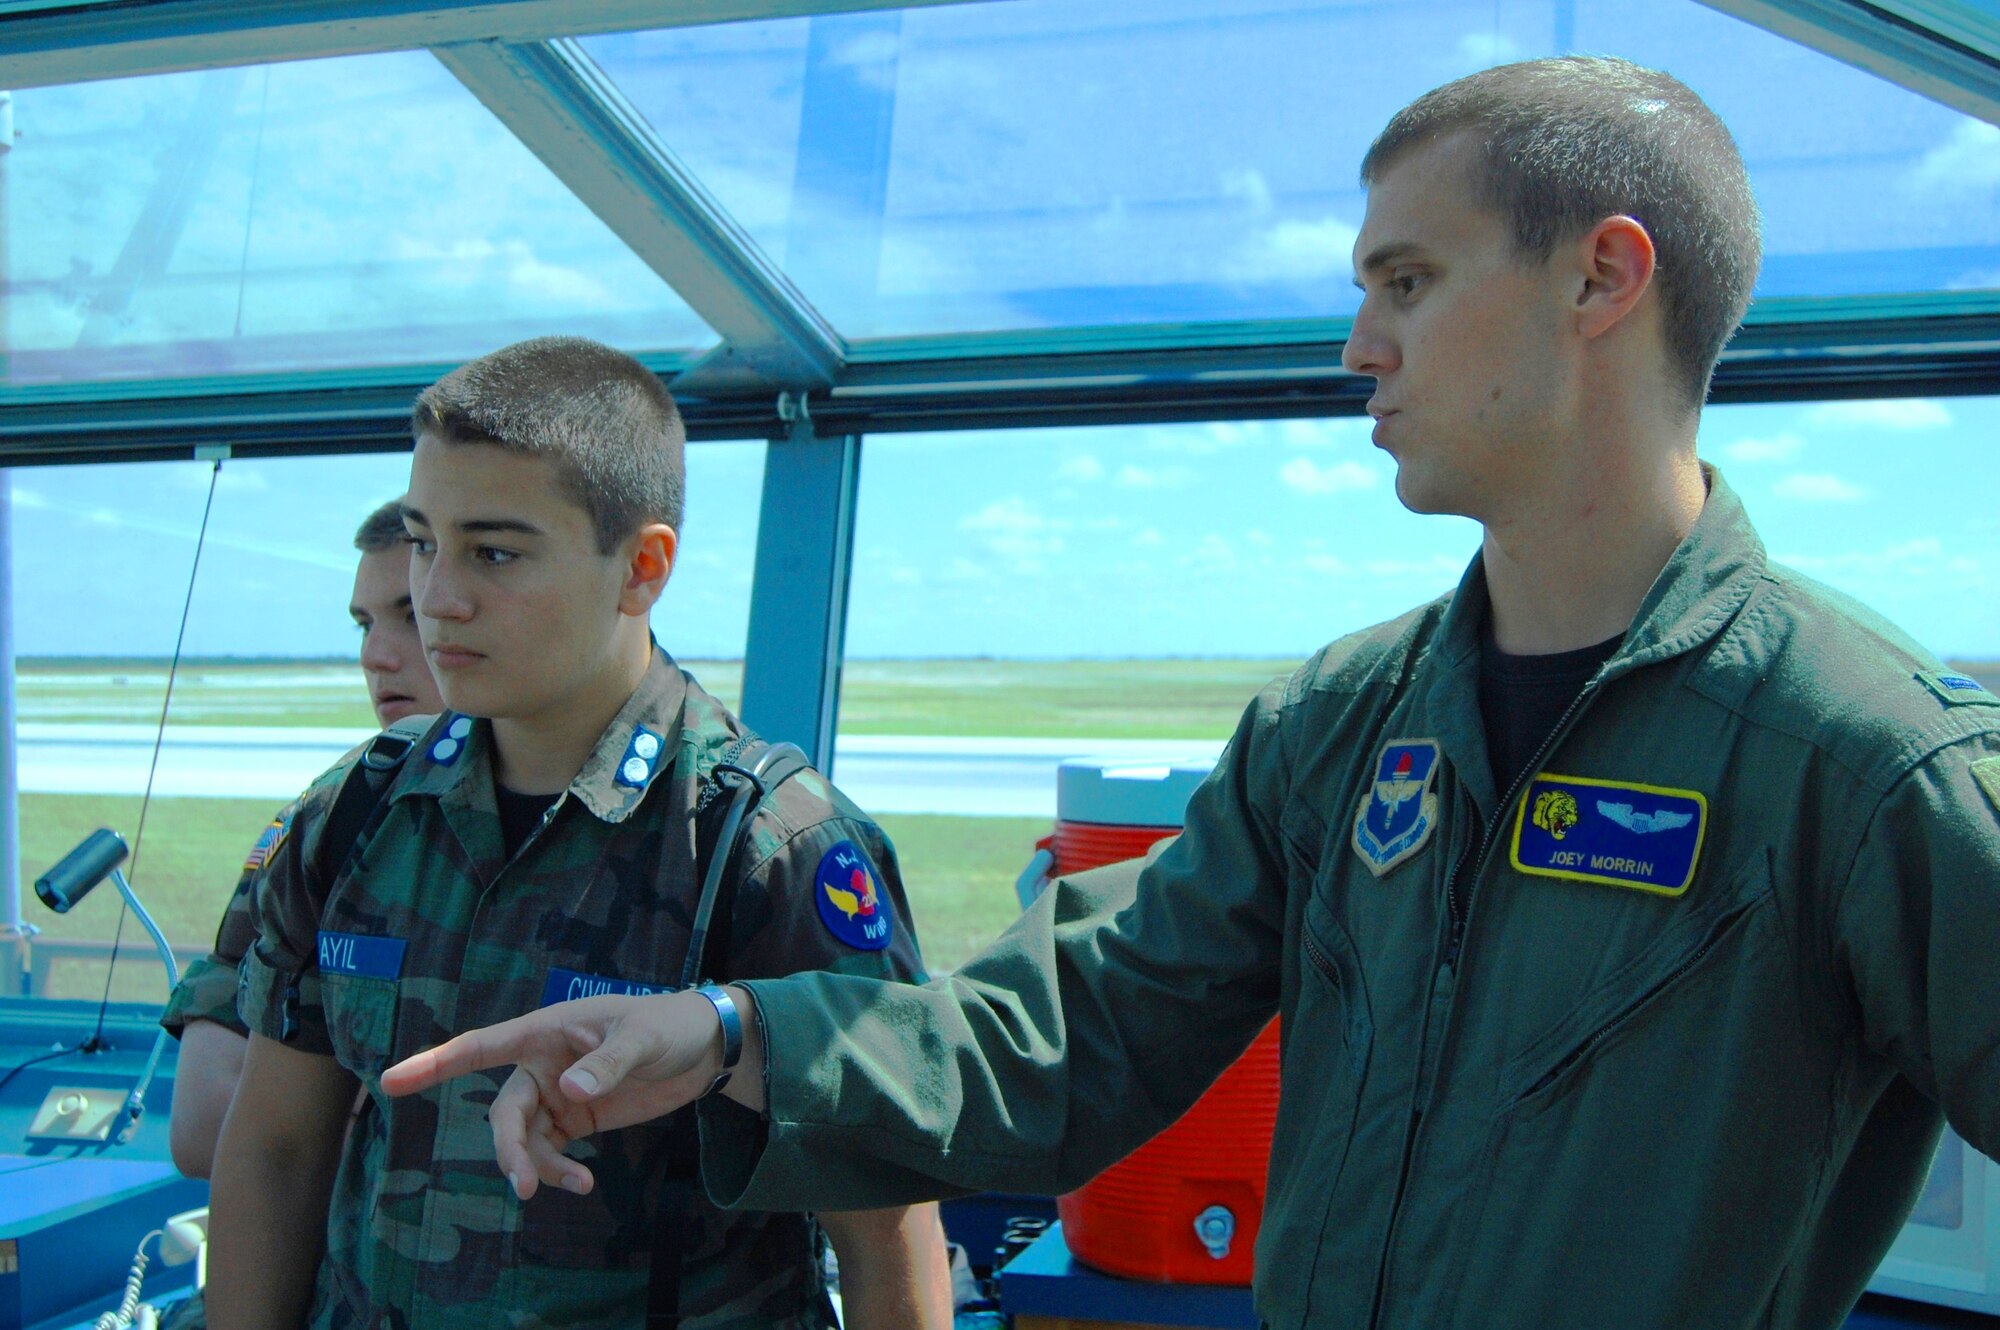 LAUGHLIN AIR FORCE BASE, Texas – First Lt. Joey Morrin, scheduler in the 85th Flying Training Squadron, explains what various instruments in a runway supervisory unit do to Cadet Alan Sayil, of East Hanover, N.J. (front), and Cadet Tim McClure, of Linden, Wash. (back). The Civil Air Patrol cadets participated June 18 through 26 in the Specialized Undergraduate Pilot Training Familiarization Course. The cadets traveled from across the nation to learn about the training Air Force pilots must complete before they are qualified to fly. (U.S. photo by Staff Sgt. Desiree Economides)